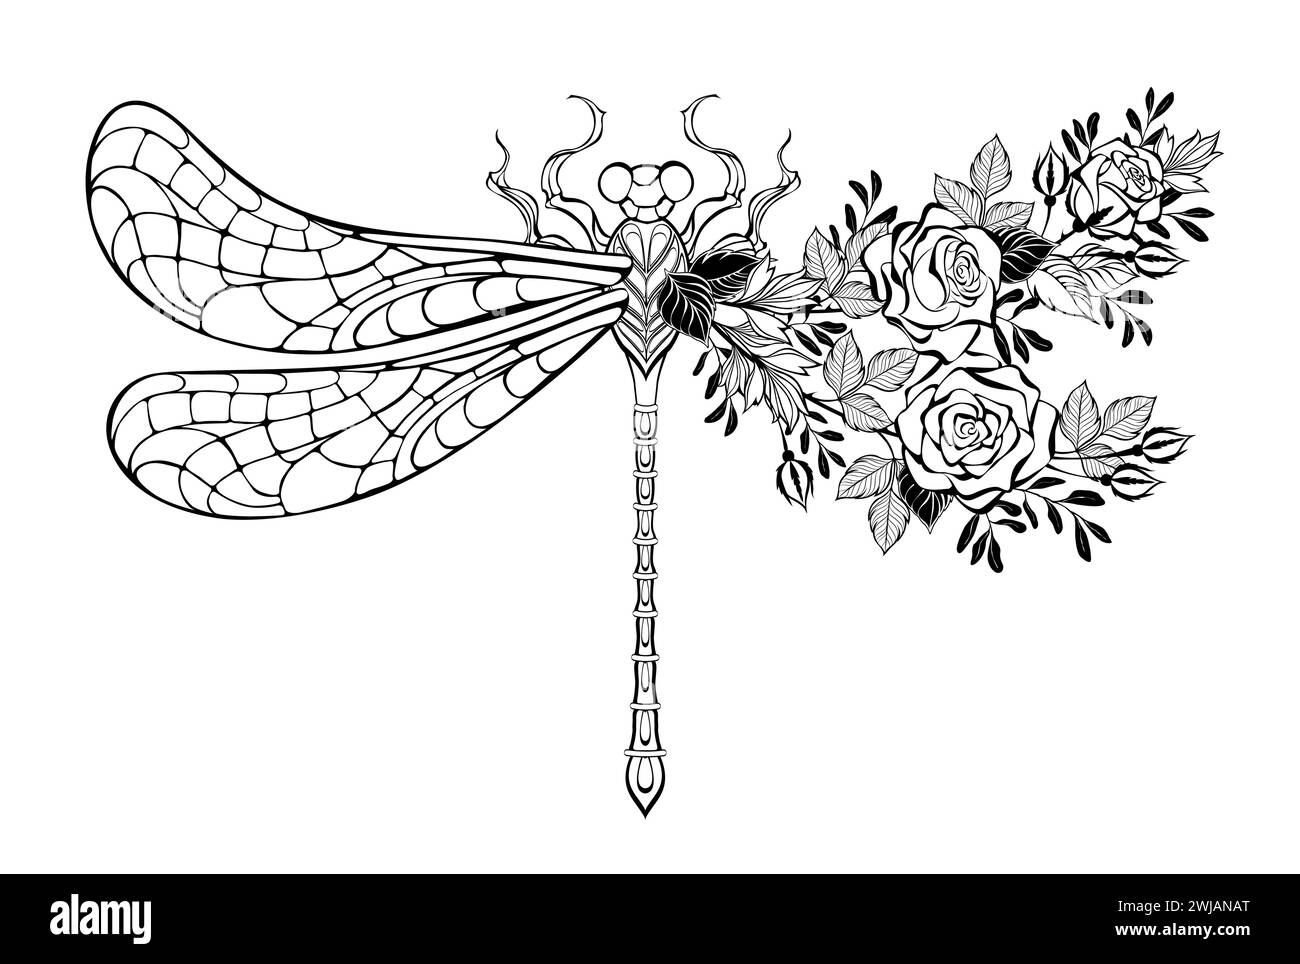 Contour, stylized, asymmetrical dragonfly, decorated with blooming roses and pistachio branches on white background. Coloring. Stock Vector